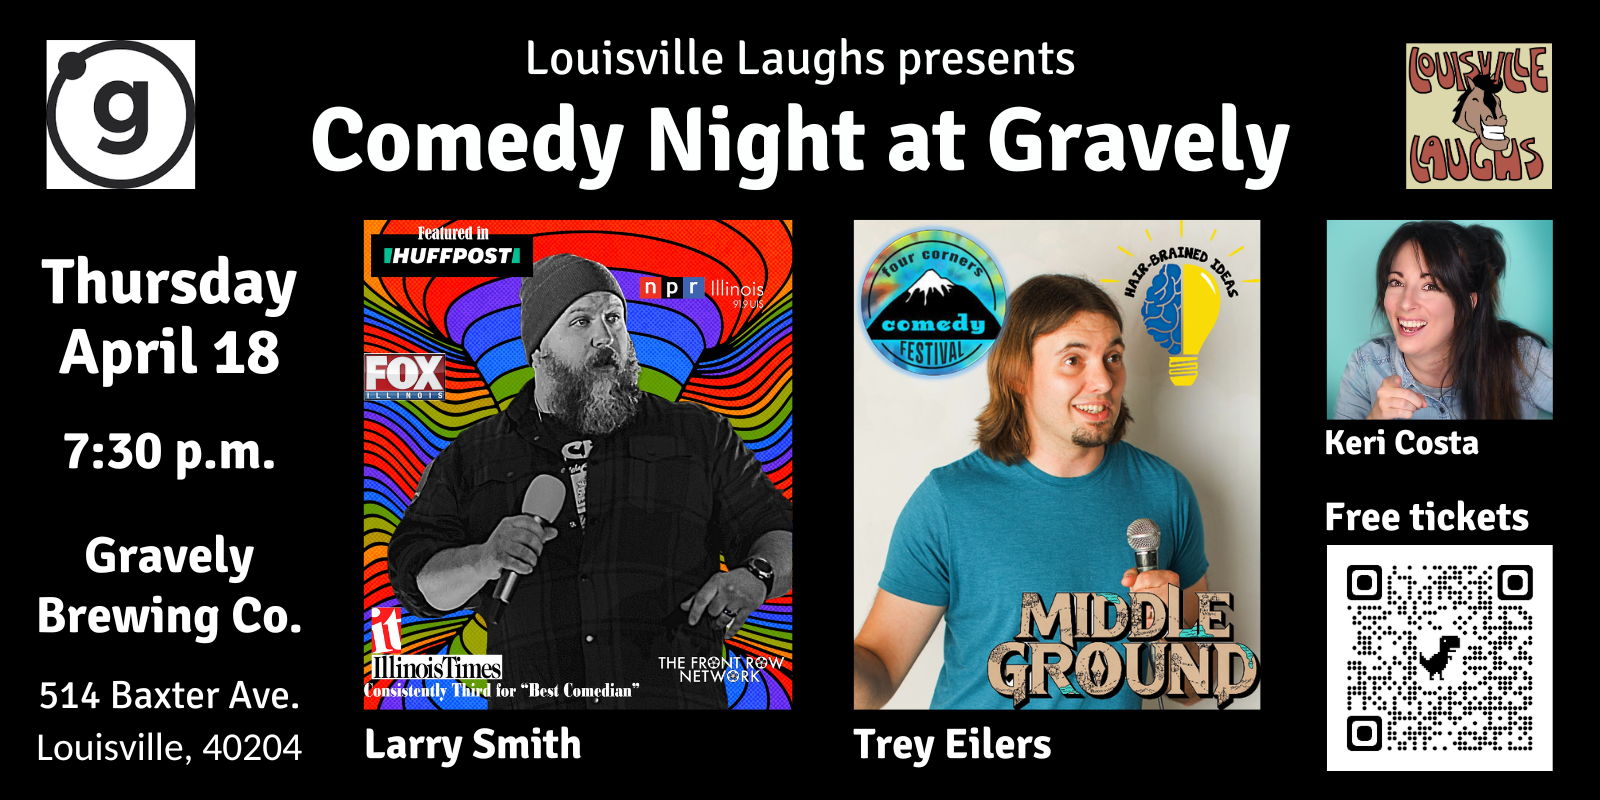 April 18 Comedy Night at Gravely promotional image